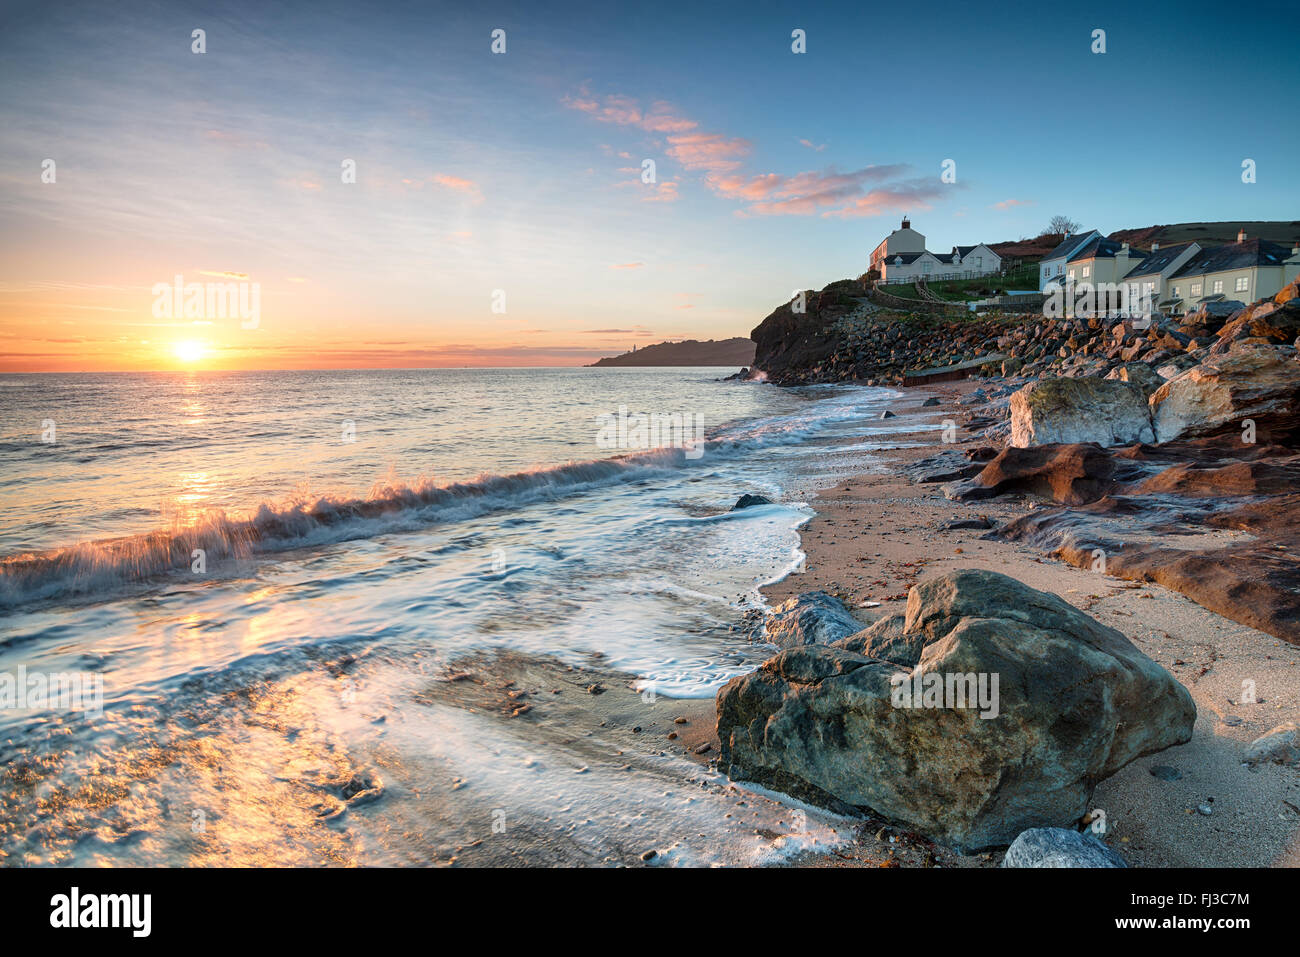 Sunrise over the beach and seaside cottages at Hallsands on the Devon coast Stock Photo